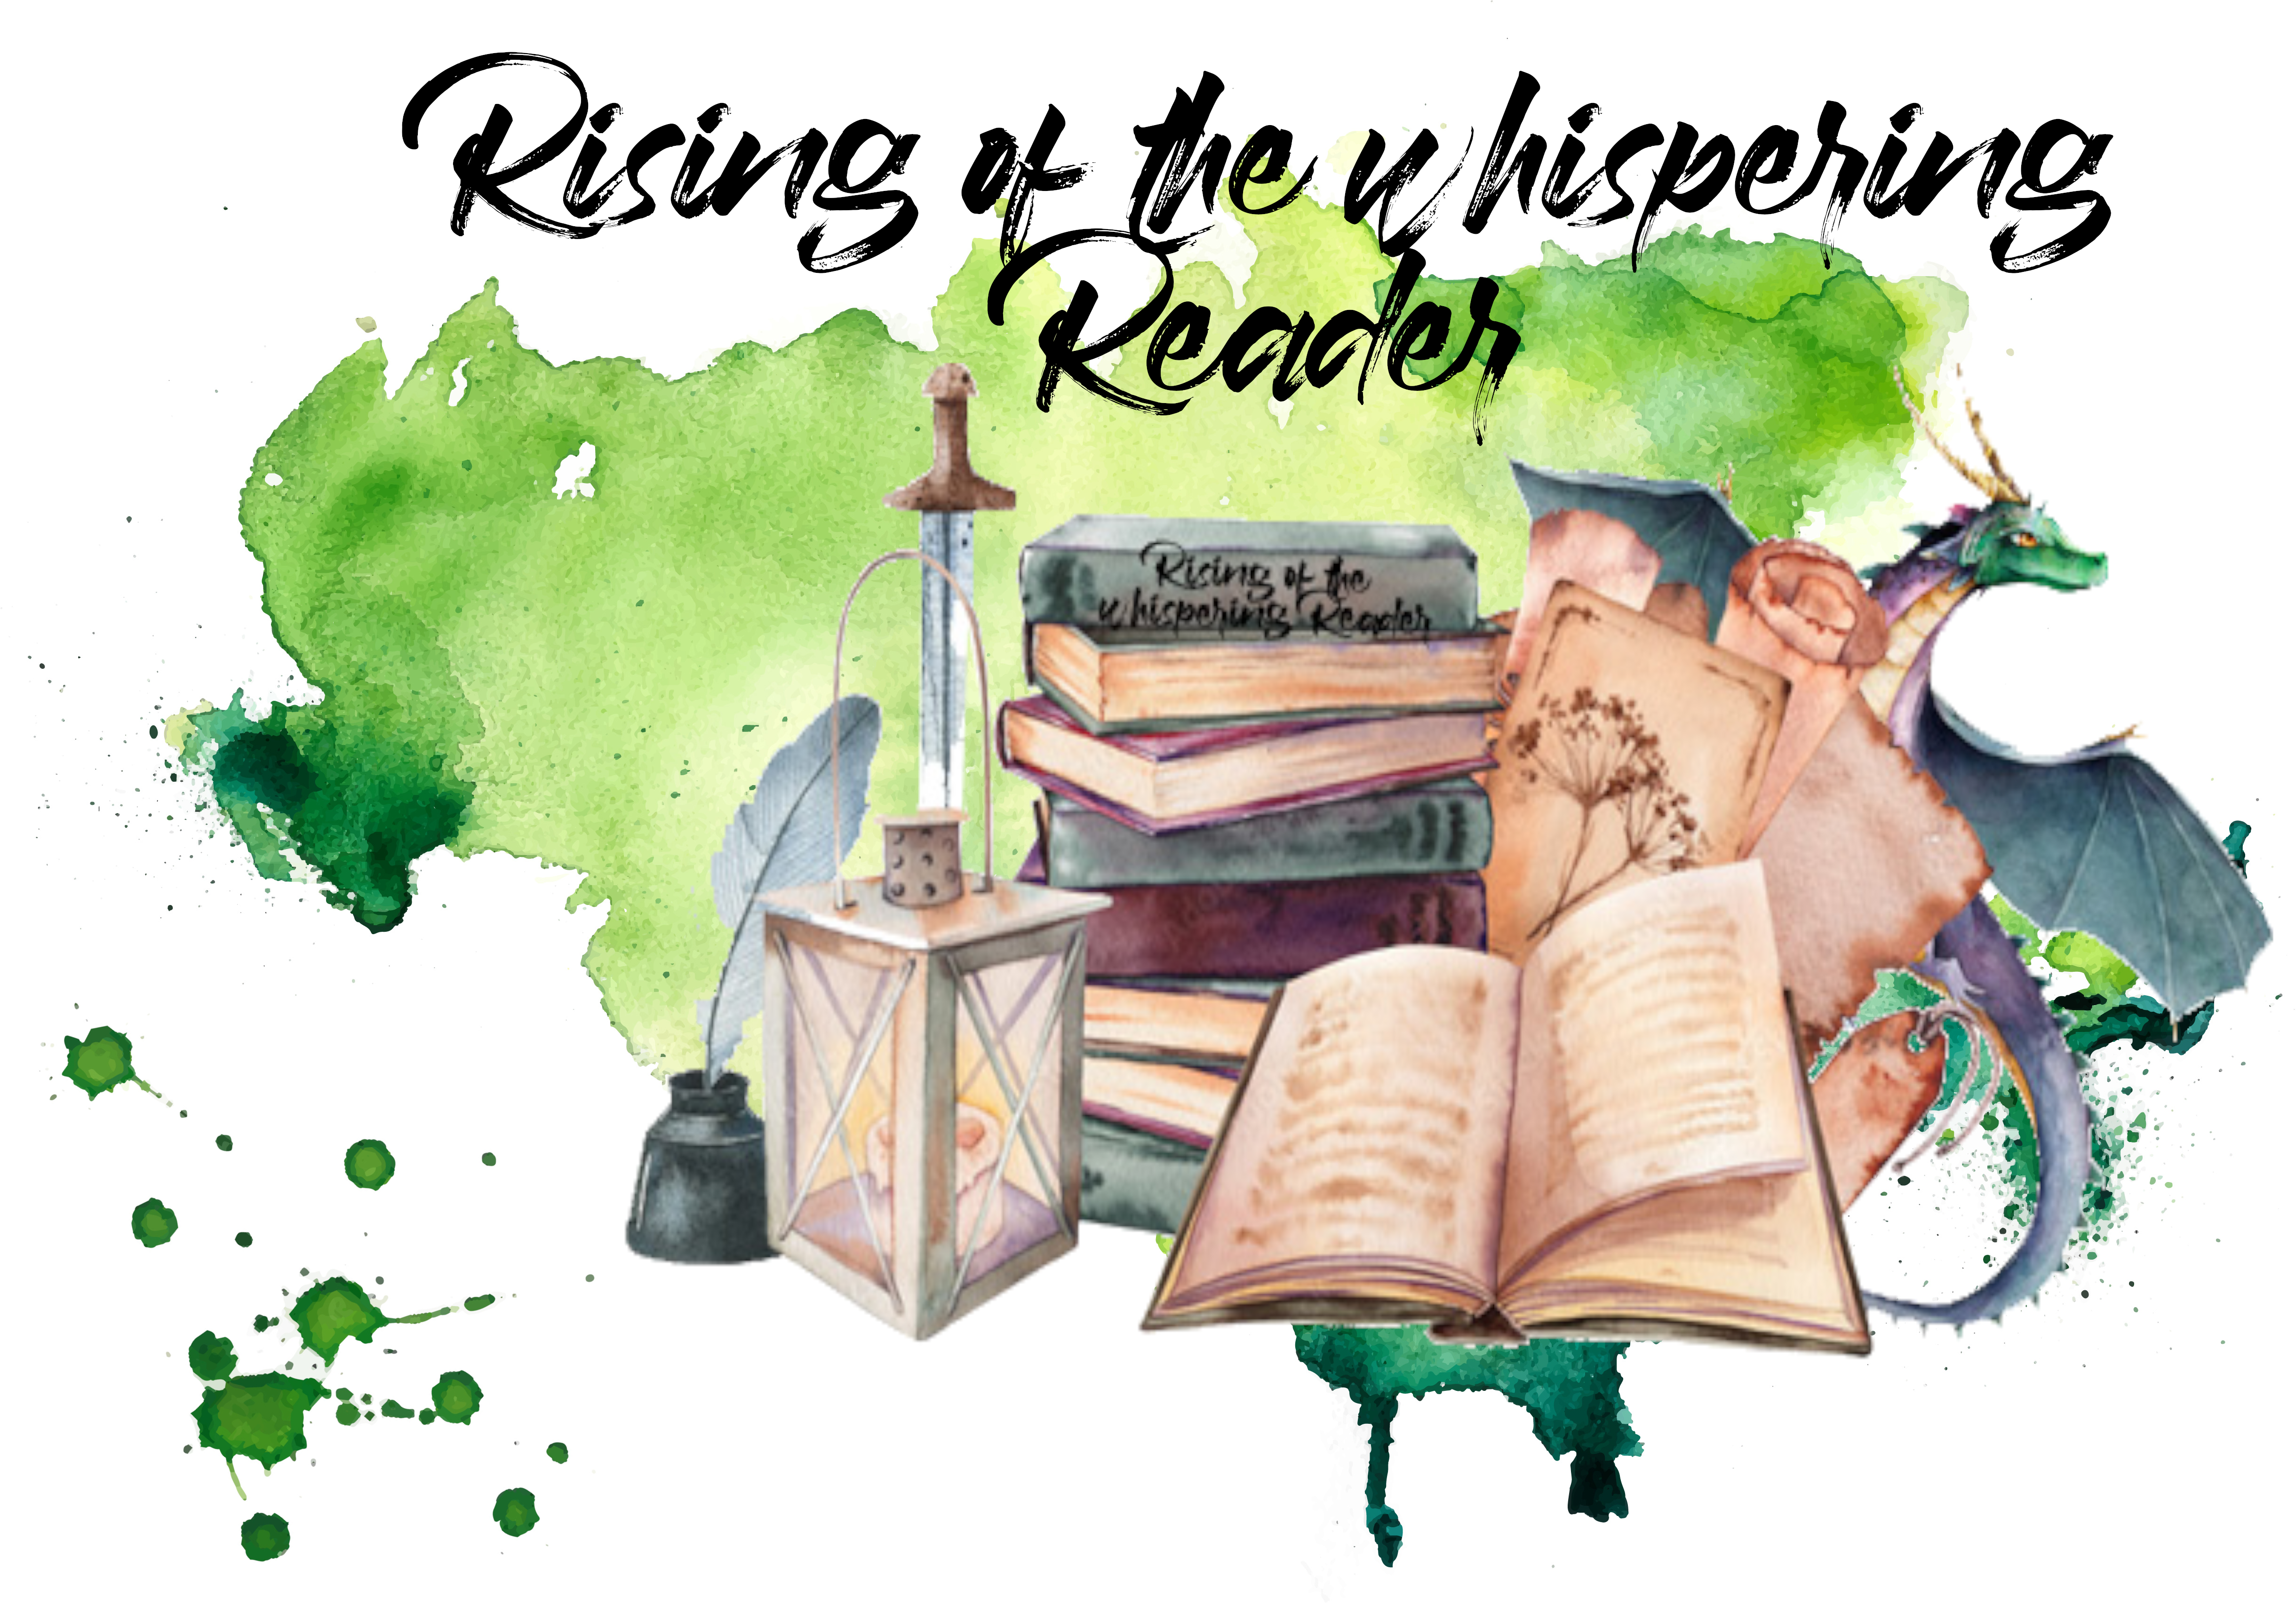 Challenge 2022 – Rising of the whispering Reader